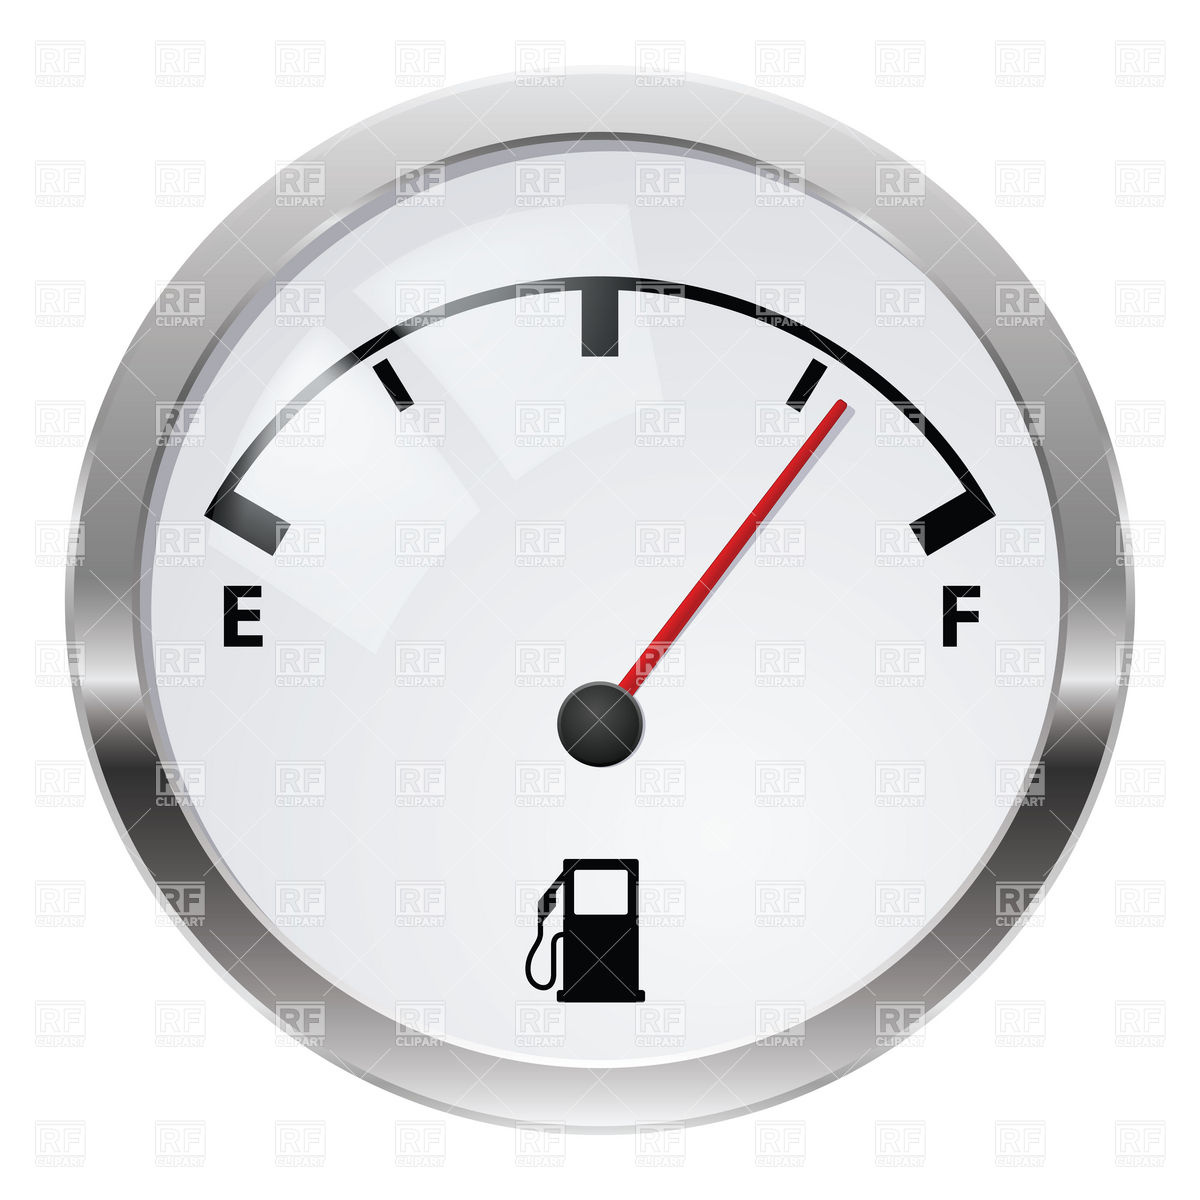 Dashboard Fuel Level Indicator 6784 Download Royalty Free Vector